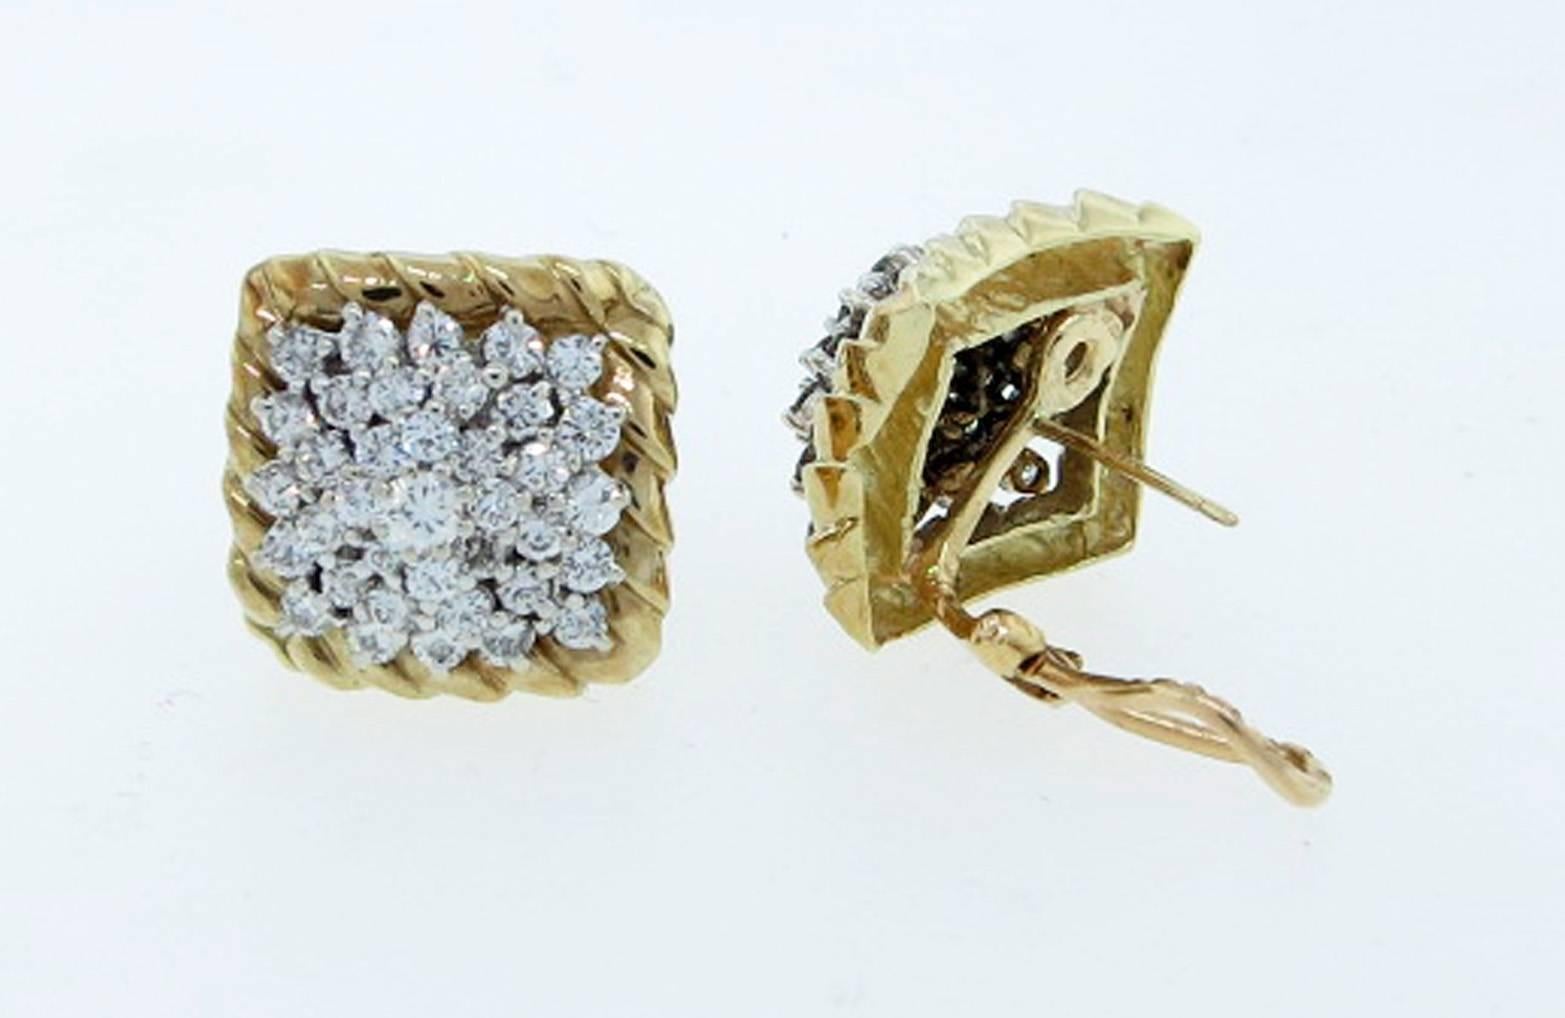 Pair of ladies clip and post back earrings. Each 14kt. rope edge earring measures a bit under 3/4 inches and is prong set in white gold with a pyramid of 38 round brilliant cut diamonds totaling approx 3.0cts. grading Vs clarity G-H color.